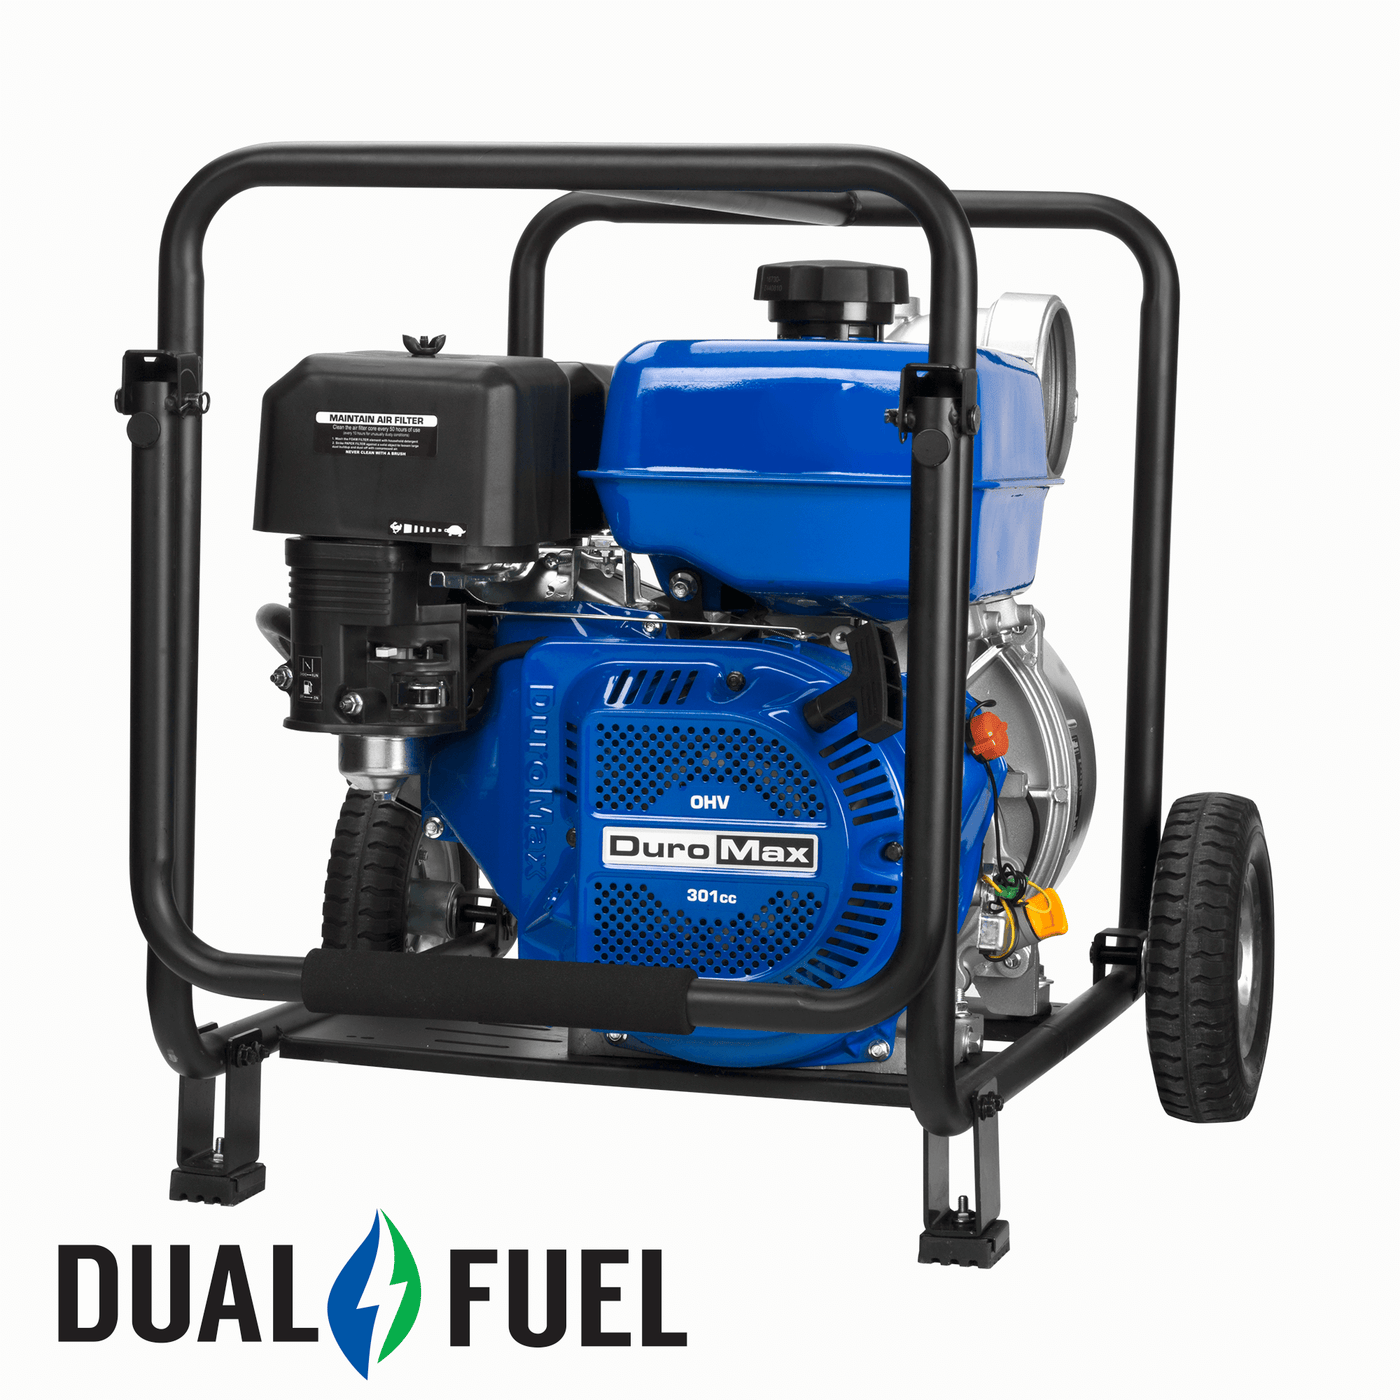 DuroMax  423 GPM 4" Dual Fuel Engine Portable Water Pump